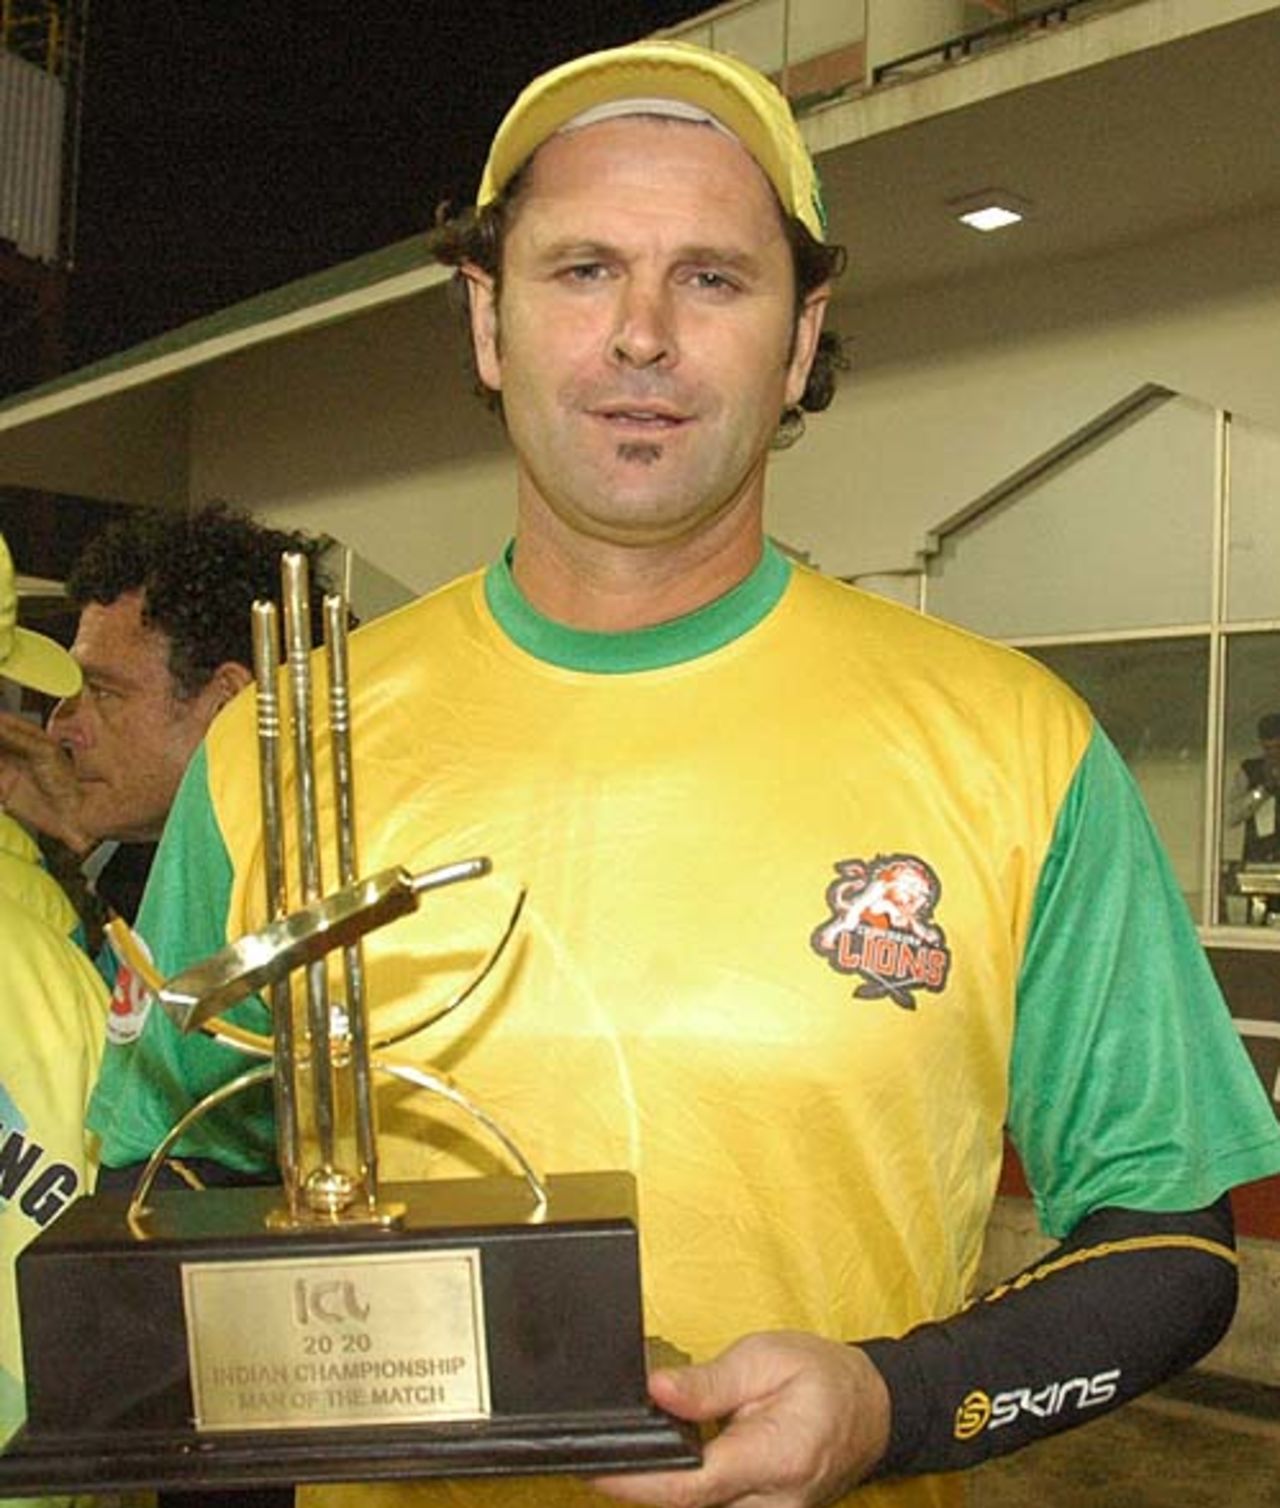 Chris Cairns was Man of the Match for his 26-ball 70, Chandigarh Lions v Mumbai Champs, 12th match, Indian Cricket League, Panchkula, December 9, 2007